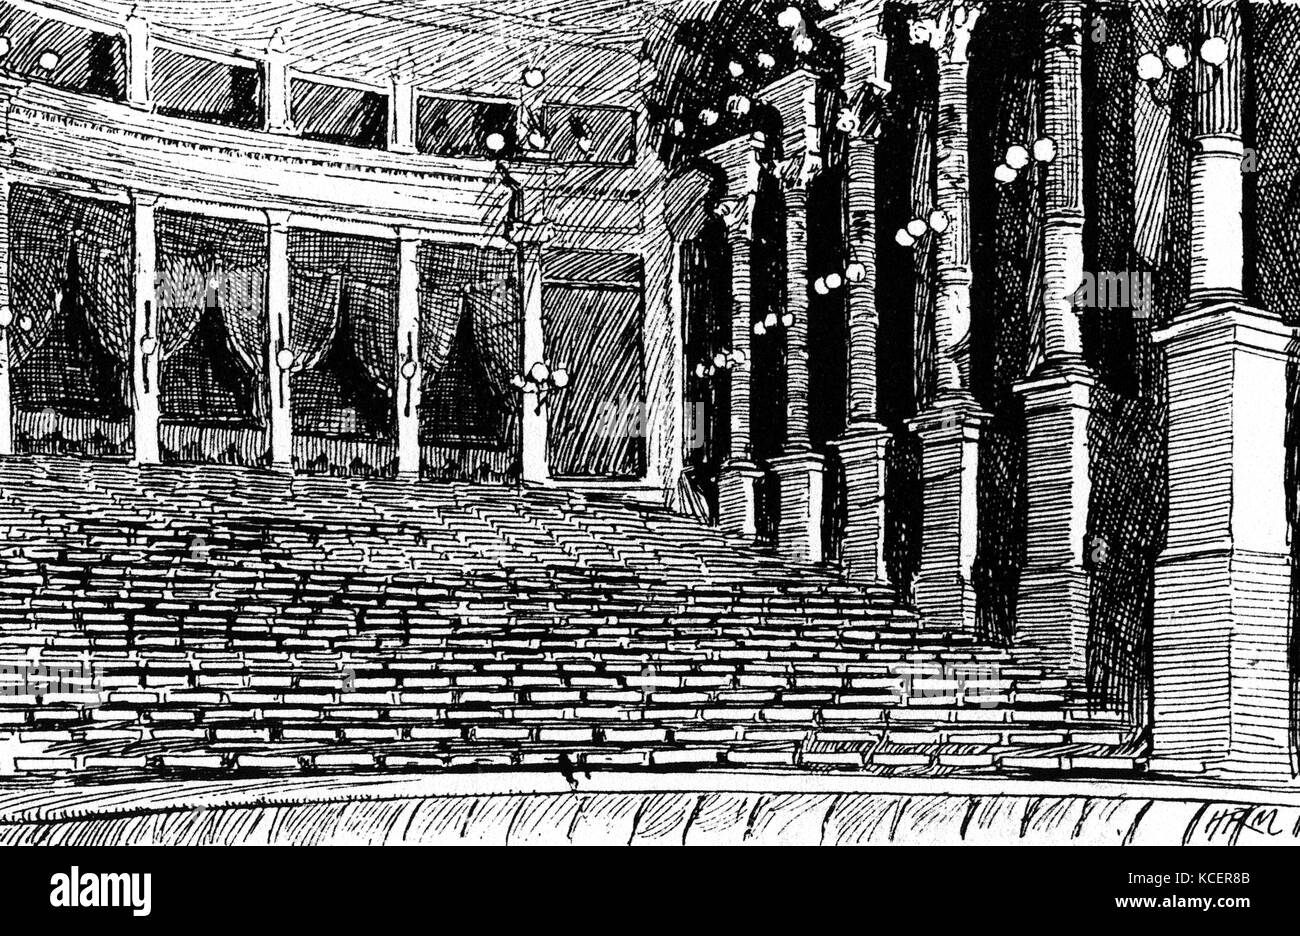 Illustration depicting the interior of the Bayreuth Festspielhaus, an opera house in Bayreuth, Germany. The opera house serves as the venue for the annual Bayreuth Festival. Dated 19th Century Stock Photo